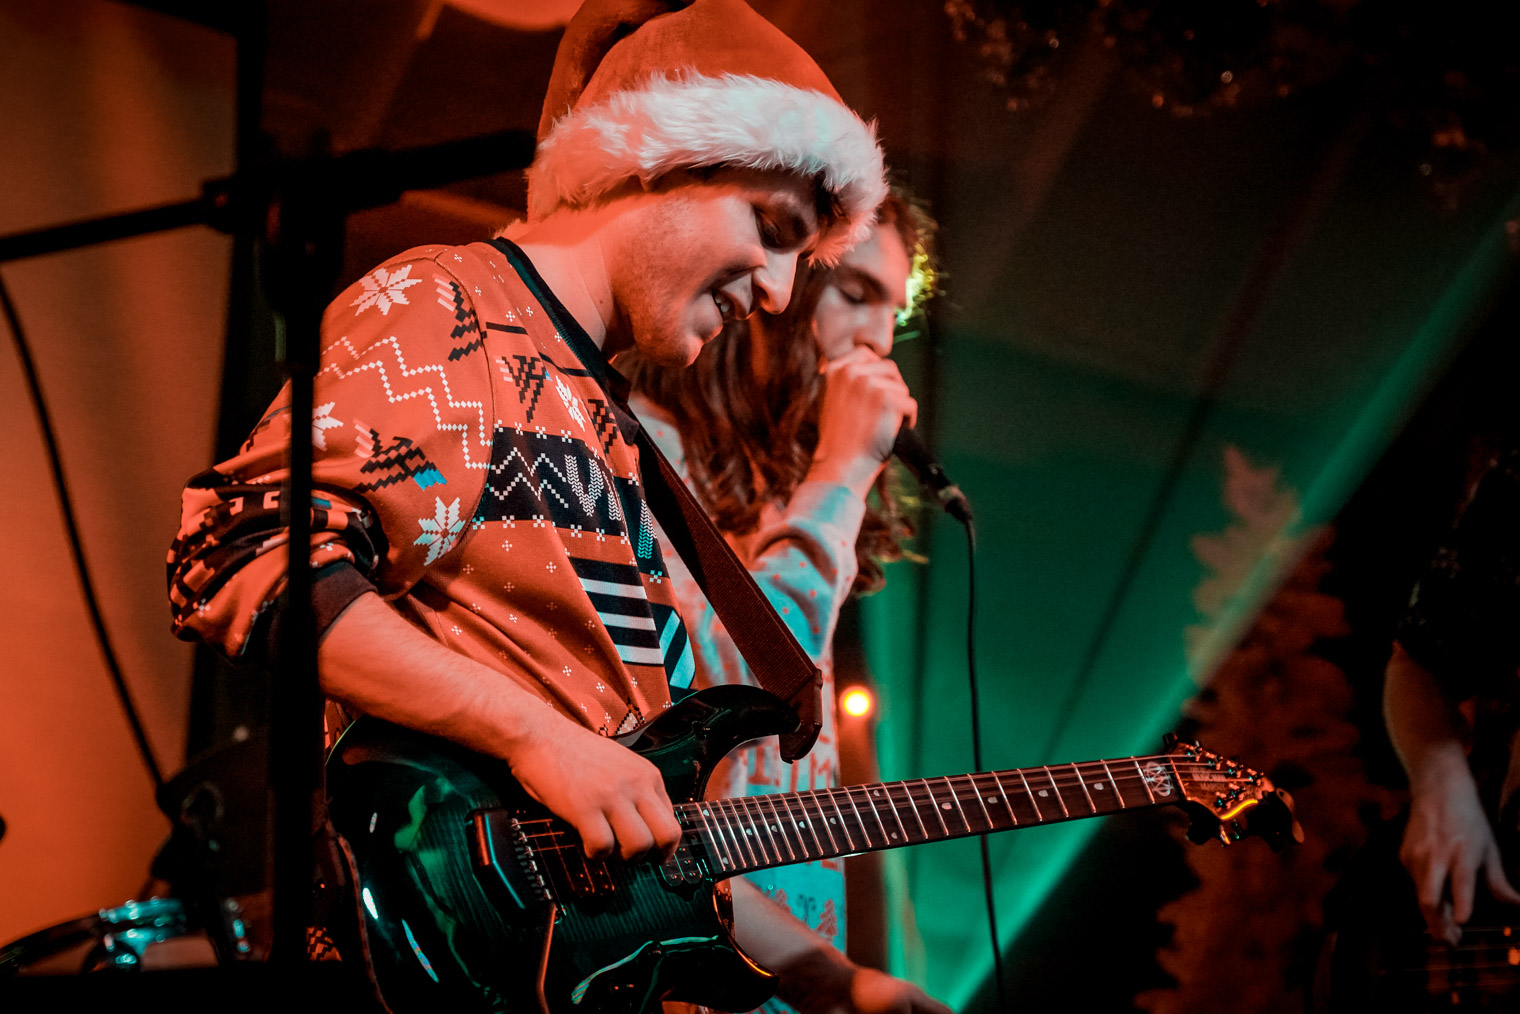 A musician playing guitar on stage wearing a Santa hat